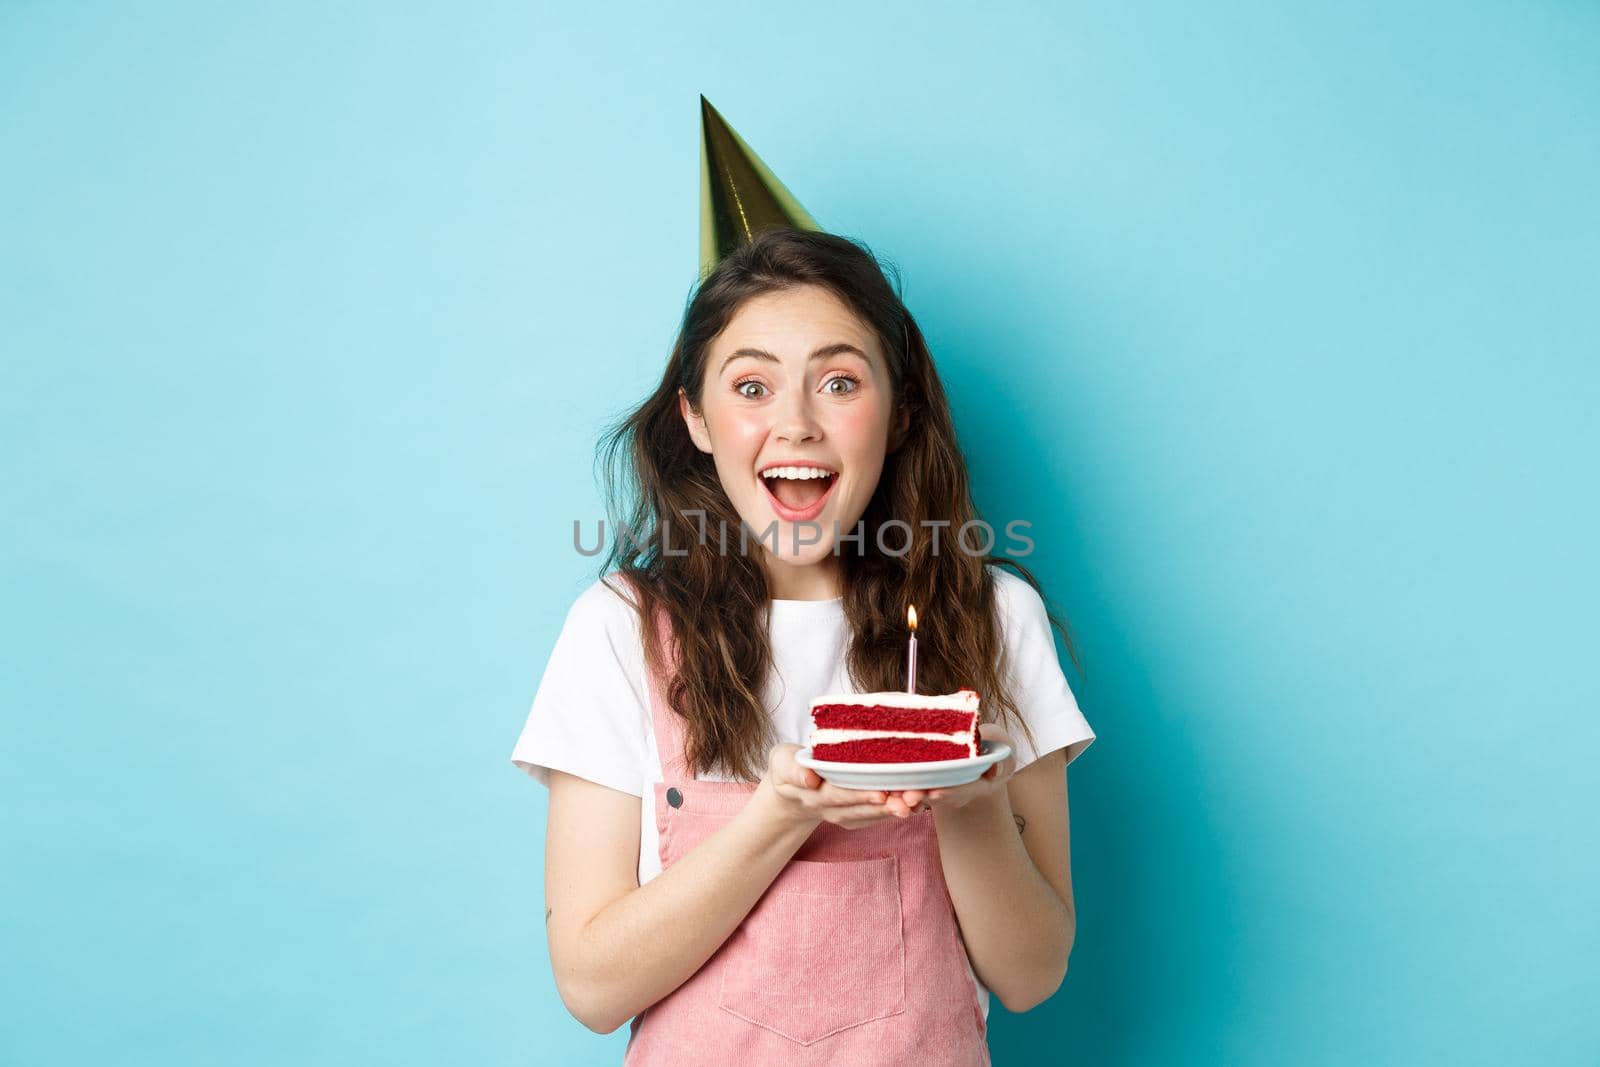 Holidays and celebration. Cheerful birthday girl in party hat holding bday cake and smiling, making wish on lit candle, standing against blue background.